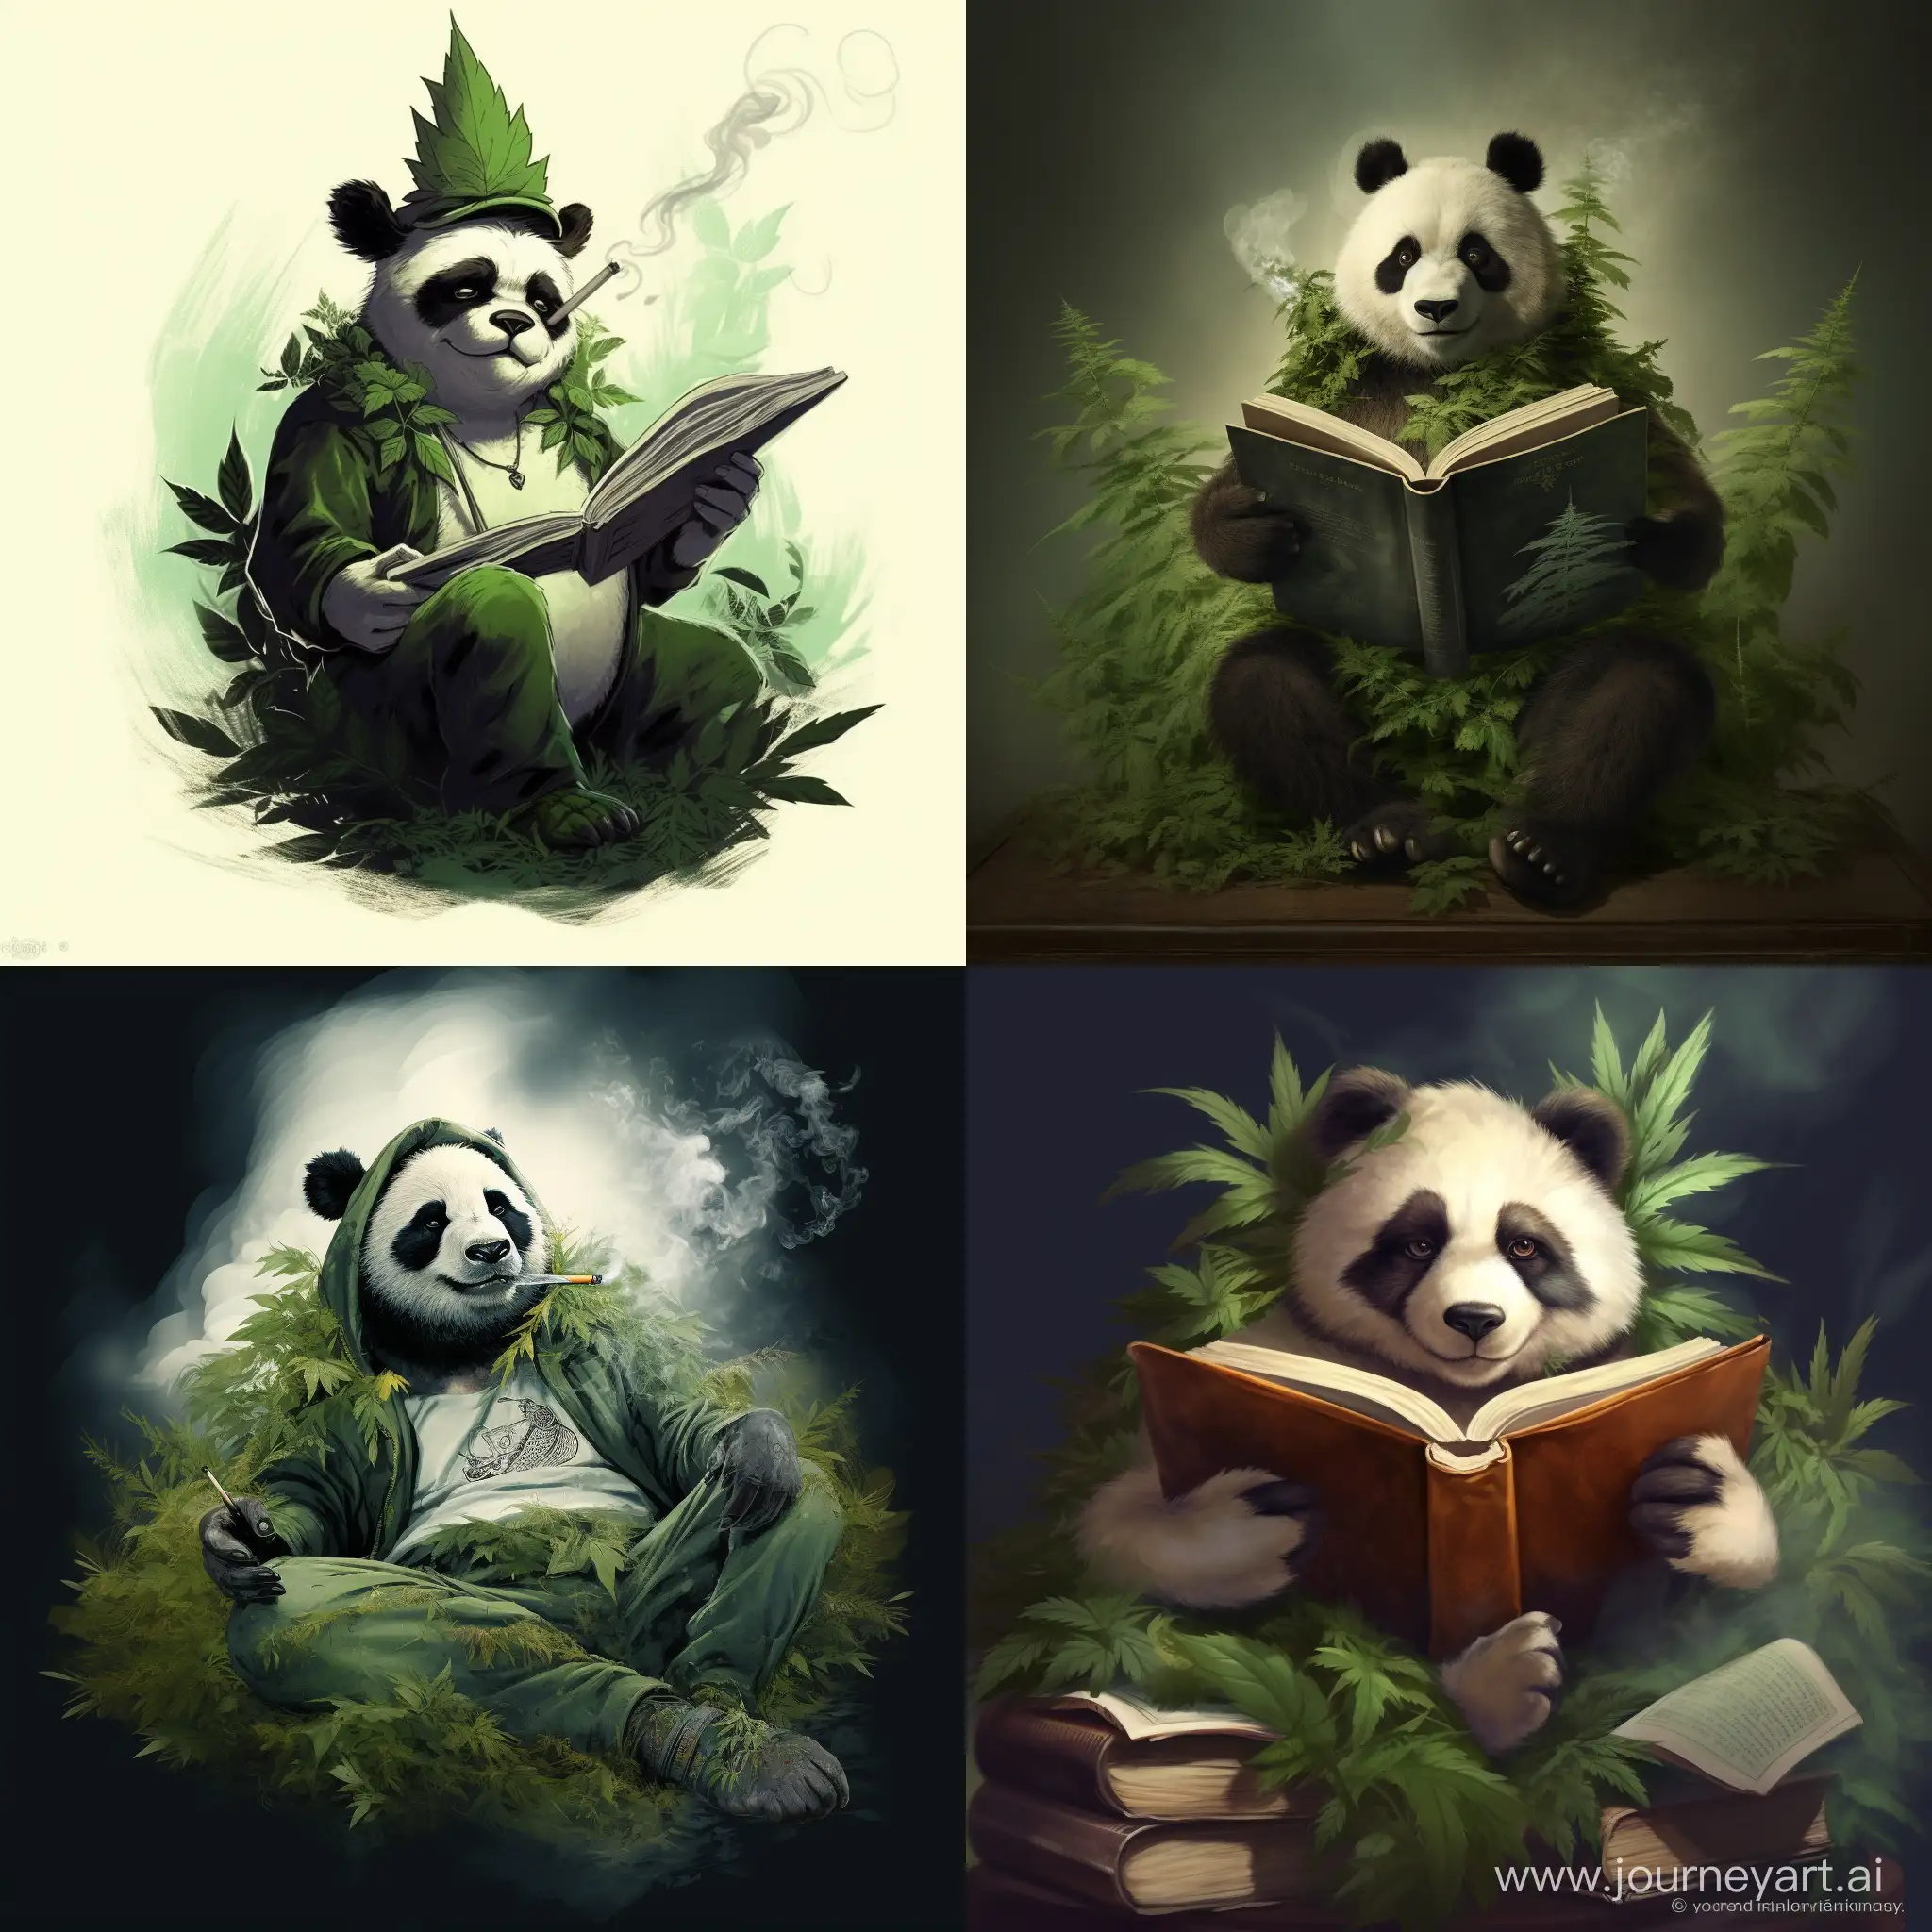 a panda bear smoking a joint sitting on the physical text G A R D E N S O C I E T Y. make the panda more cartoony and no clothes just fur. I want the panda to look happy 
